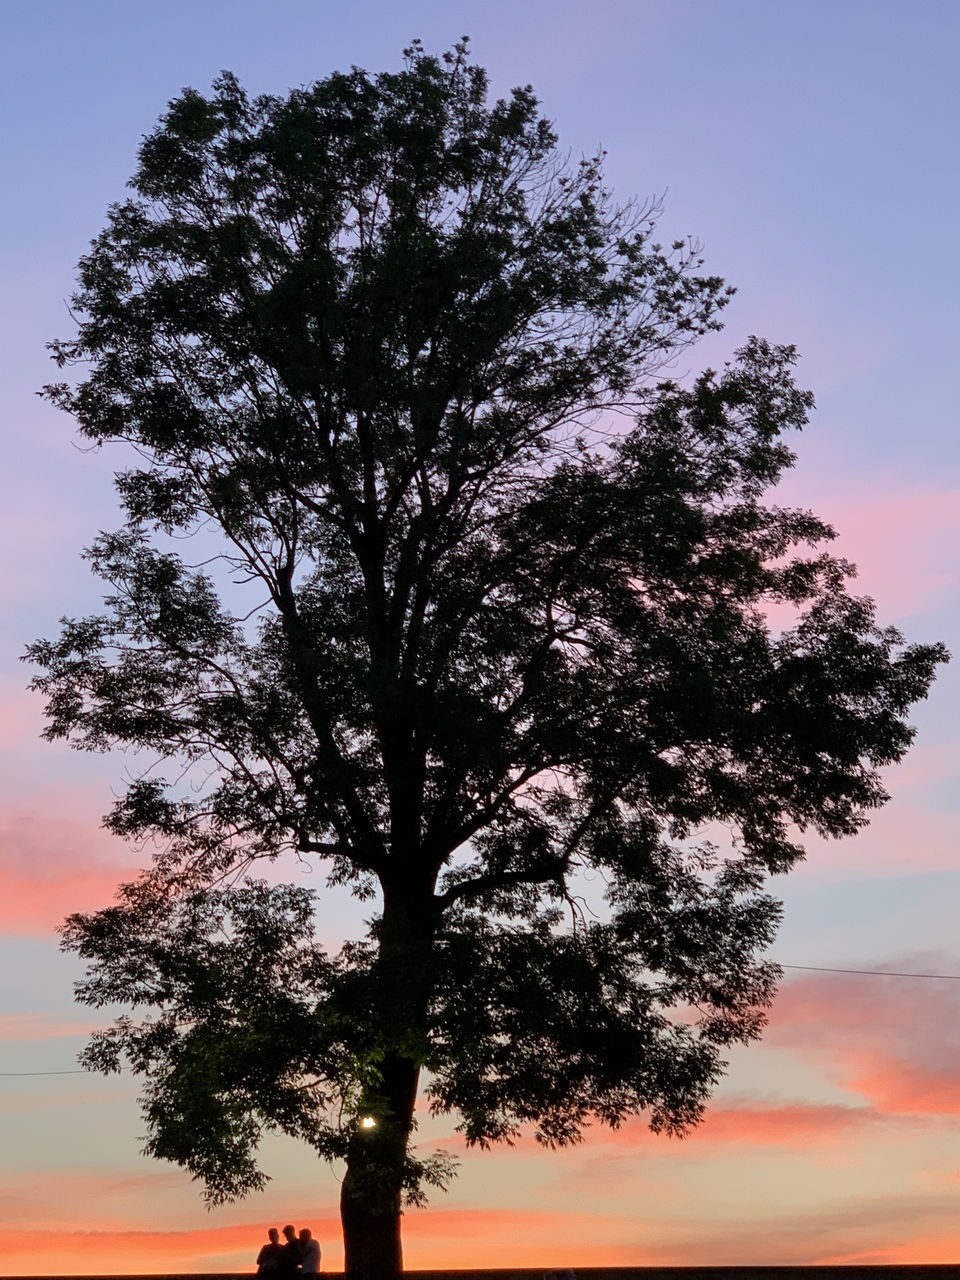 LOW ANGLE VIEW OF SILHOUETTE TREE AGAINST ORANGE SKY